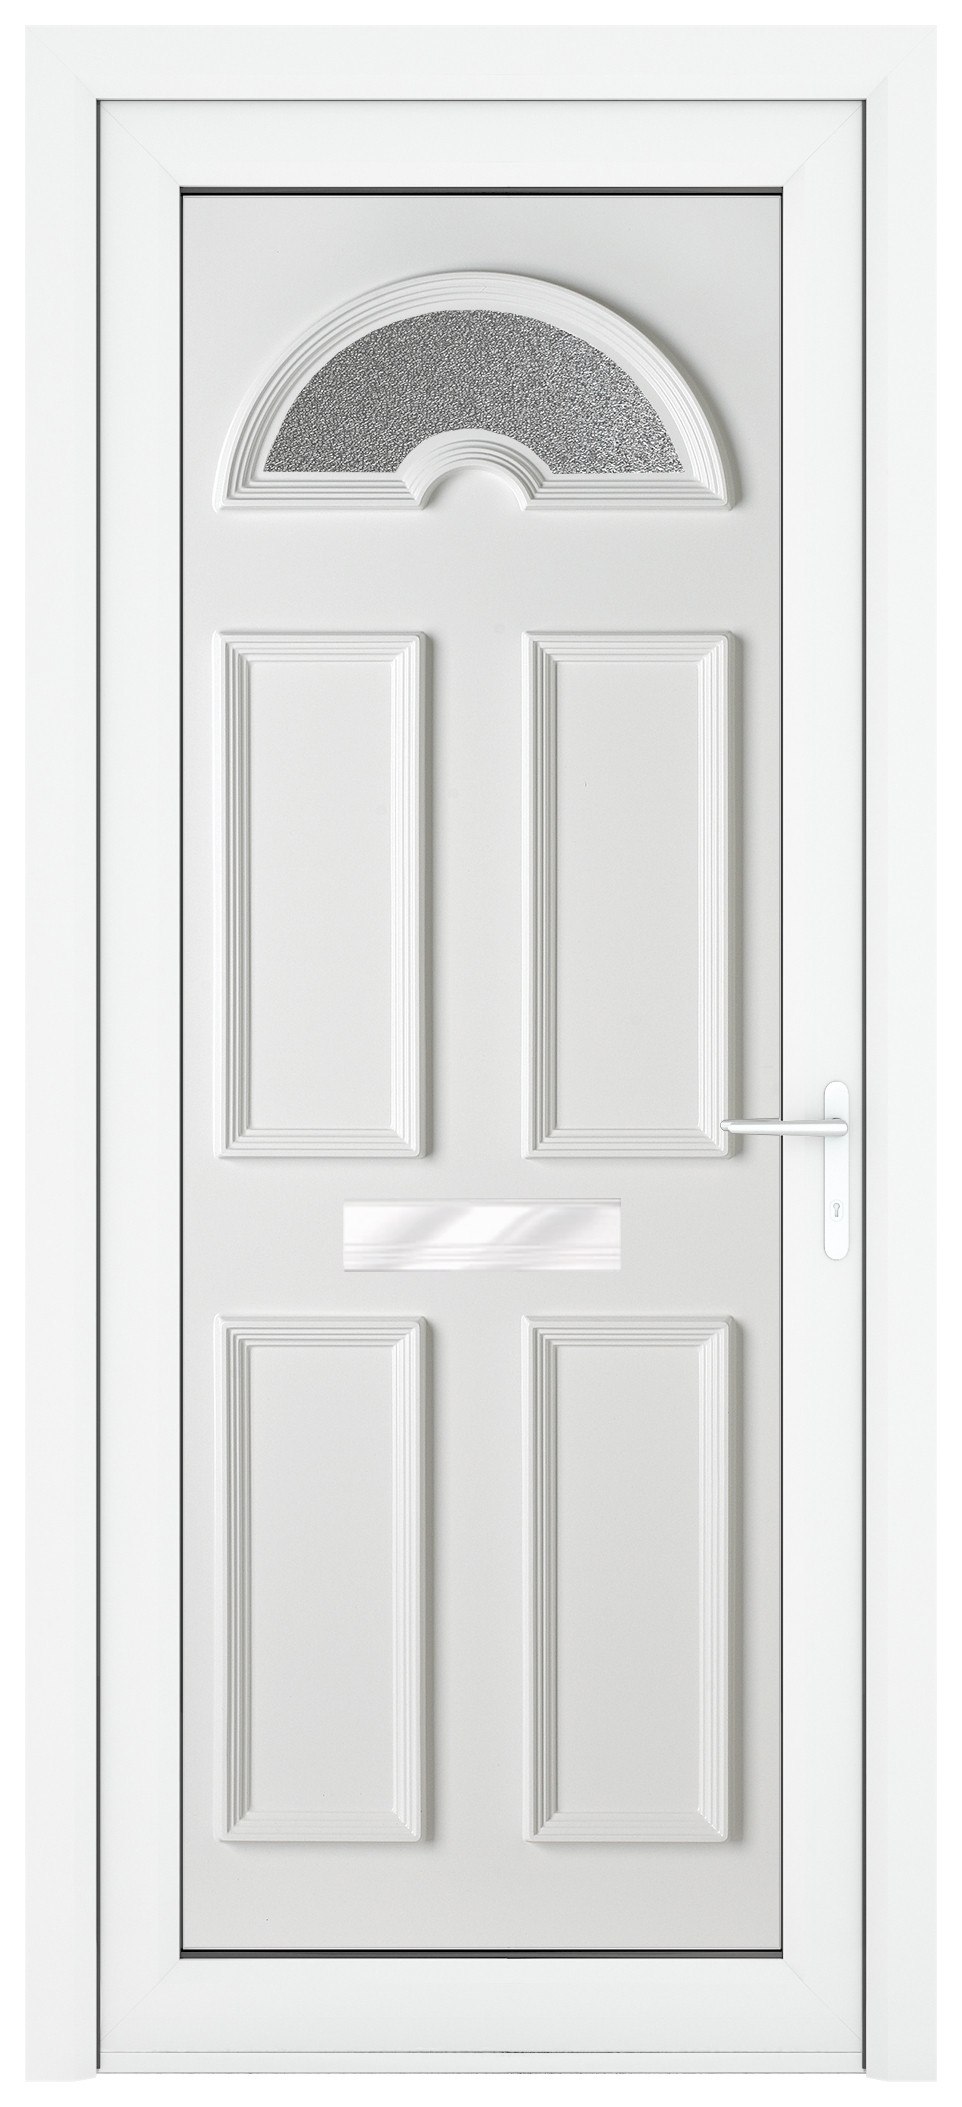 Crystal Sandringham Left Hand Pre-hung White uPVC Front Door with Obscure Sunburst Glazing - 920 x 2090mm